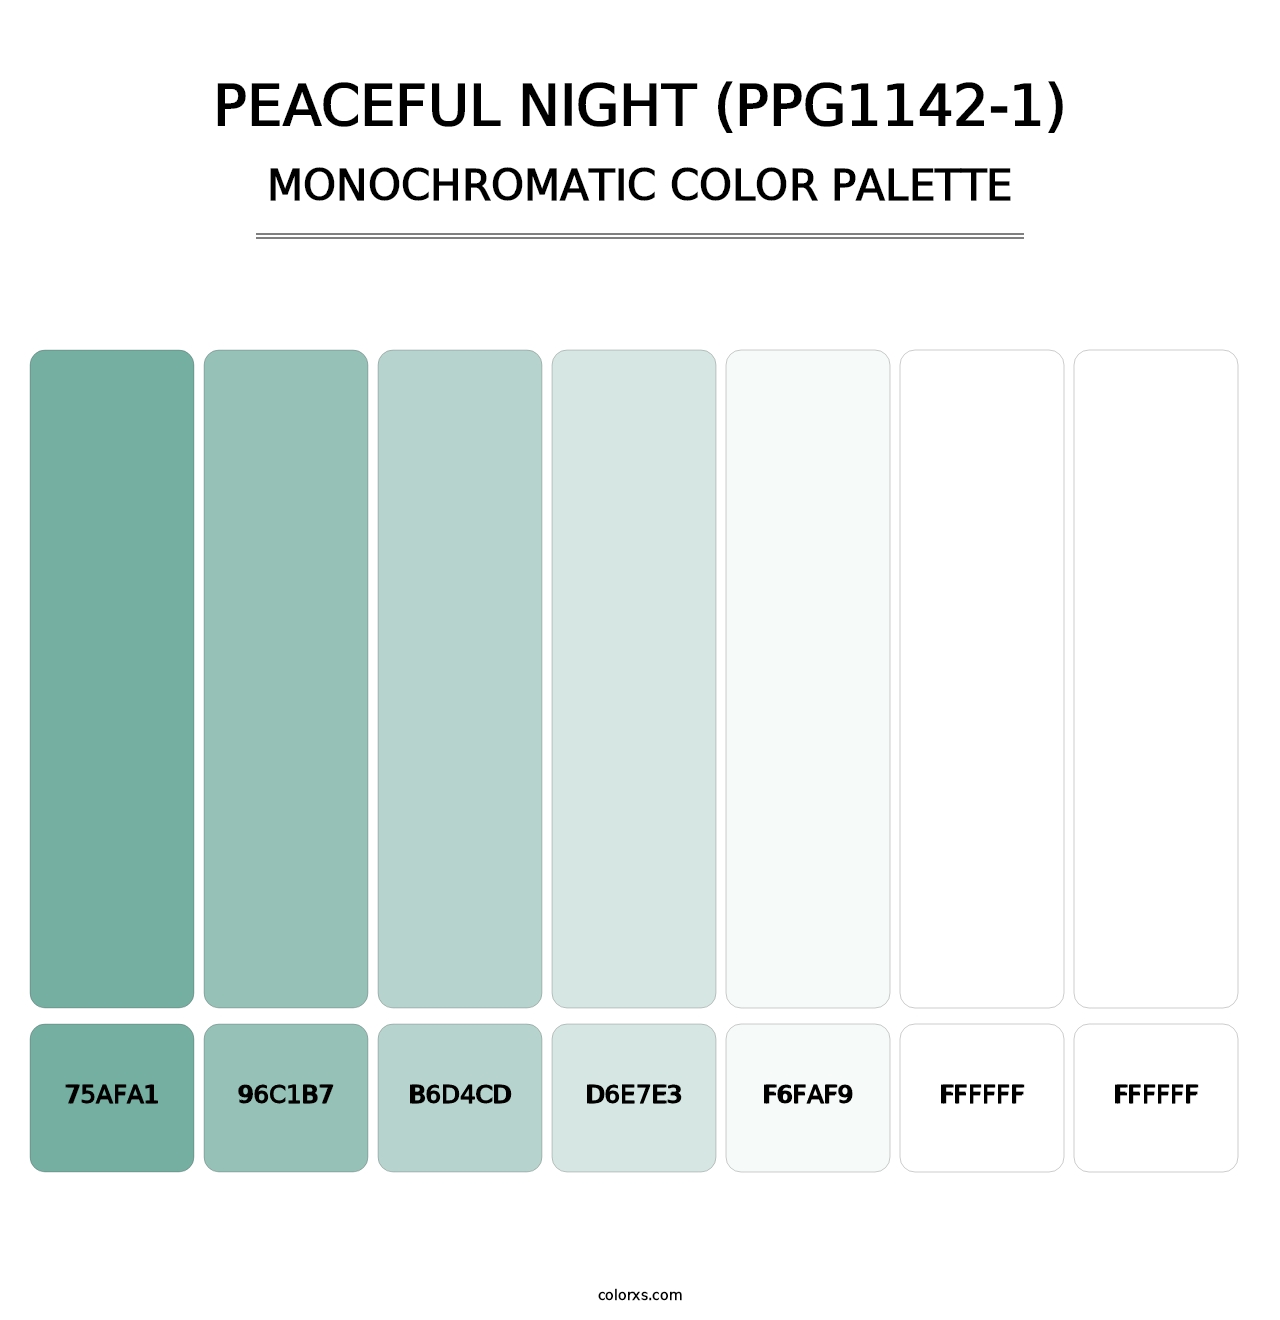 Peaceful Night (PPG1142-1) - Monochromatic Color Palette